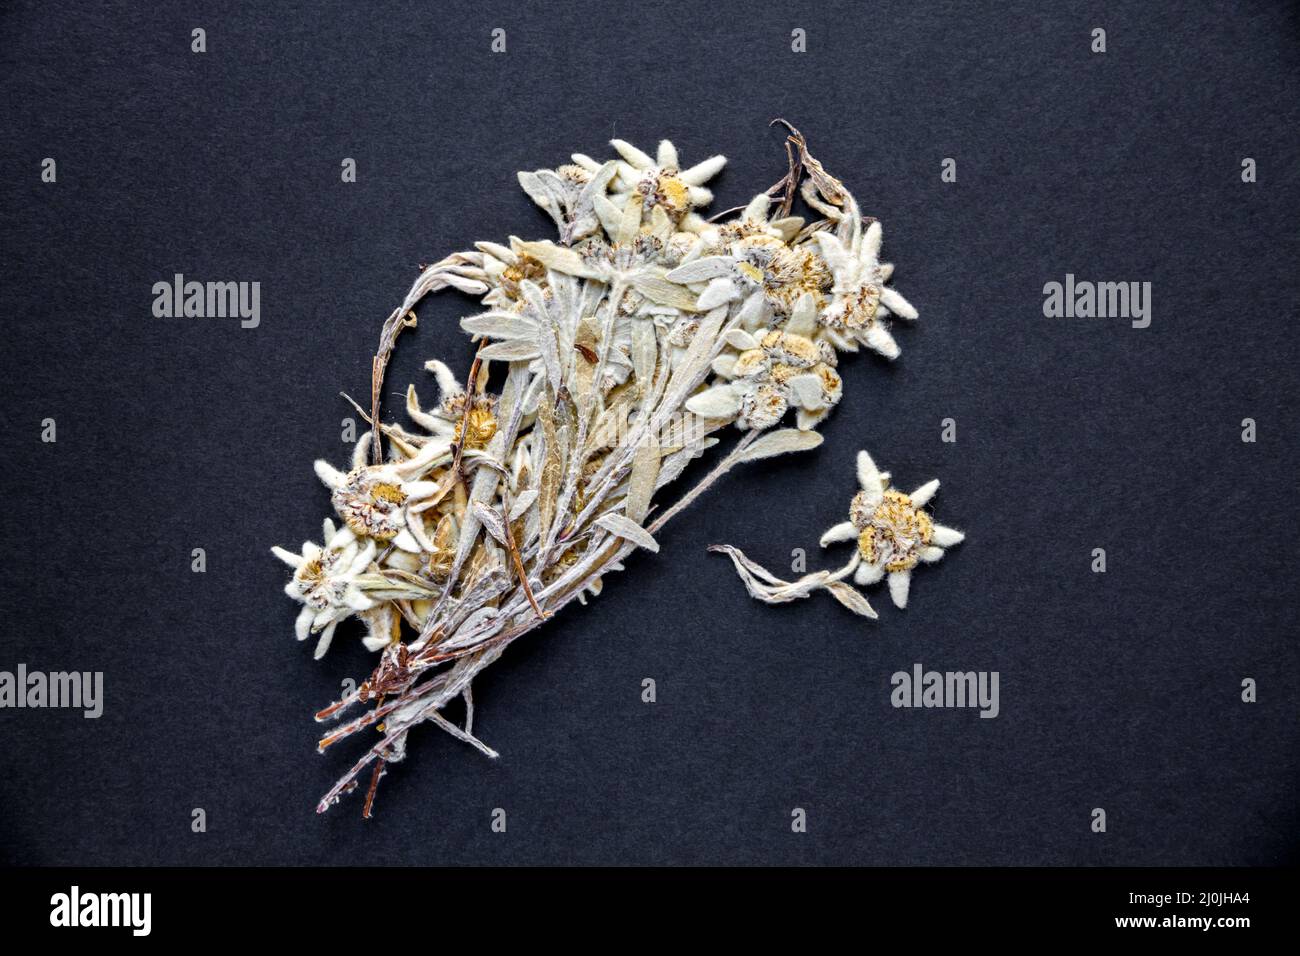 Edelweiss flower isolated on black background Stock Photo